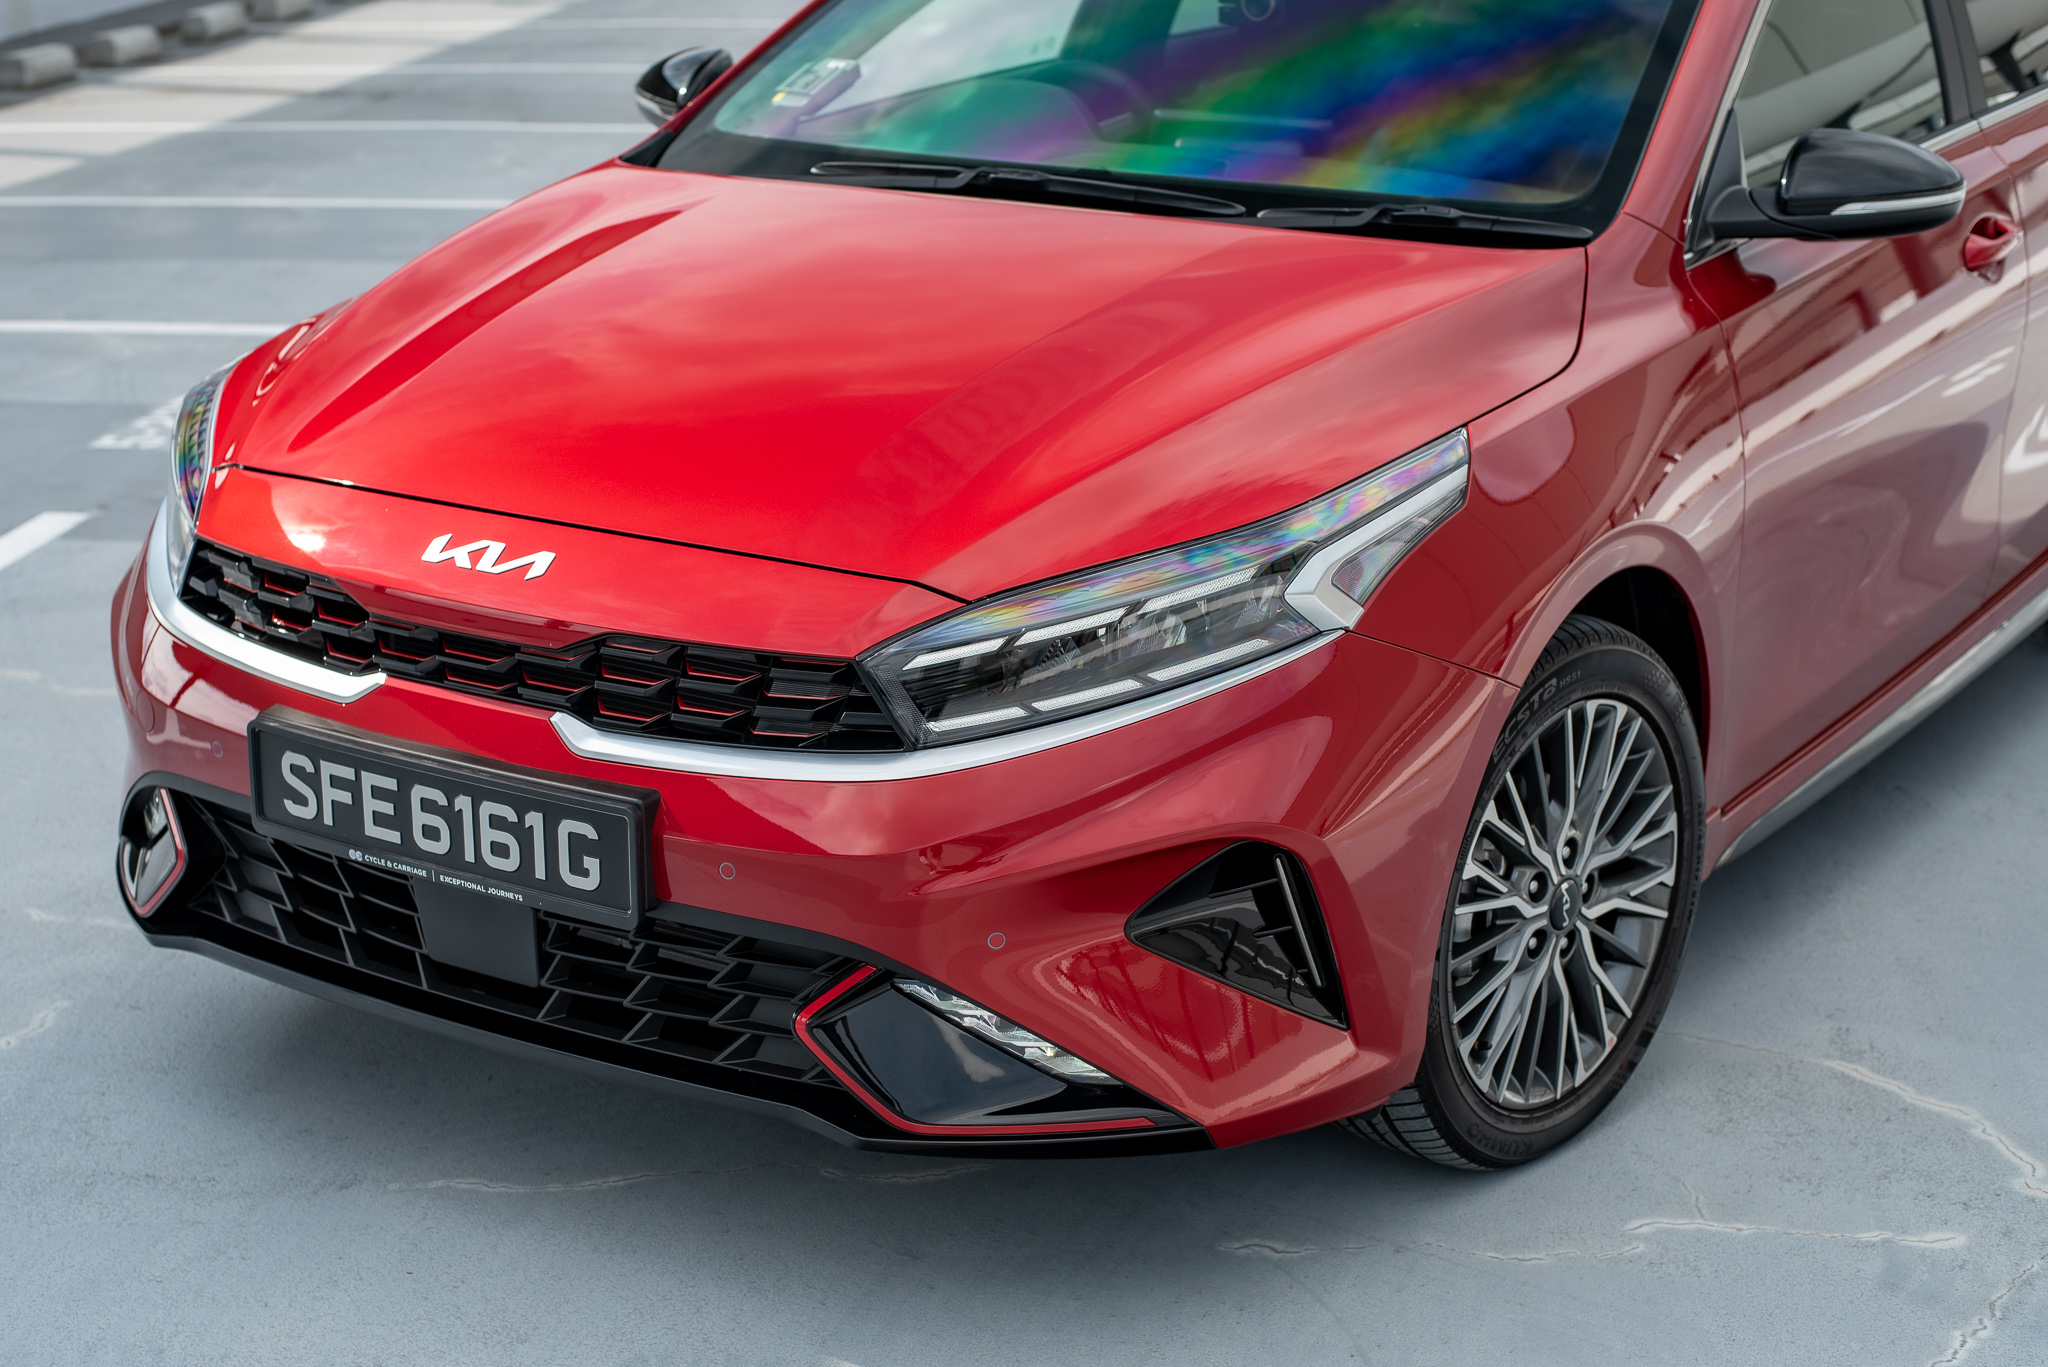 2021 Kia Cerato 1.6 GT Line Review by Jay Tee | TopGear Singapore